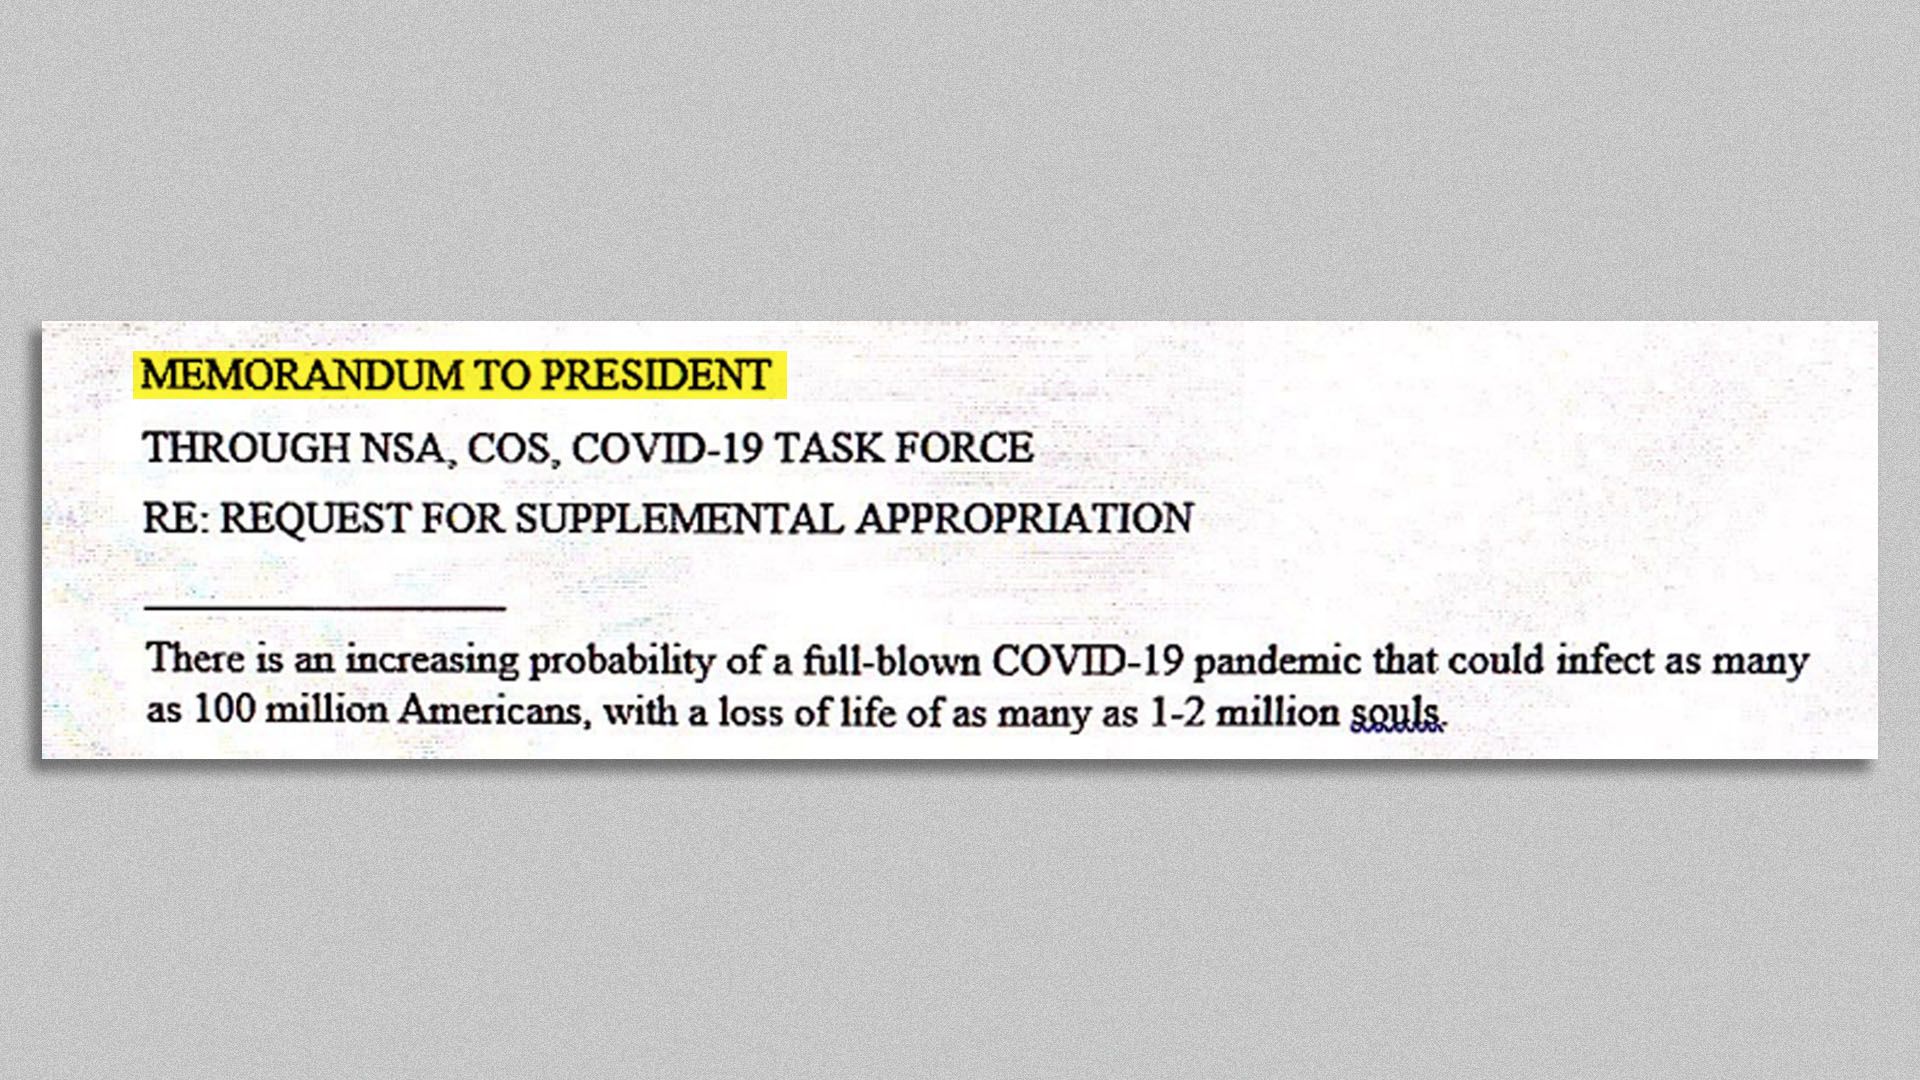 Image from a page of a memo to President Trump on covid-19